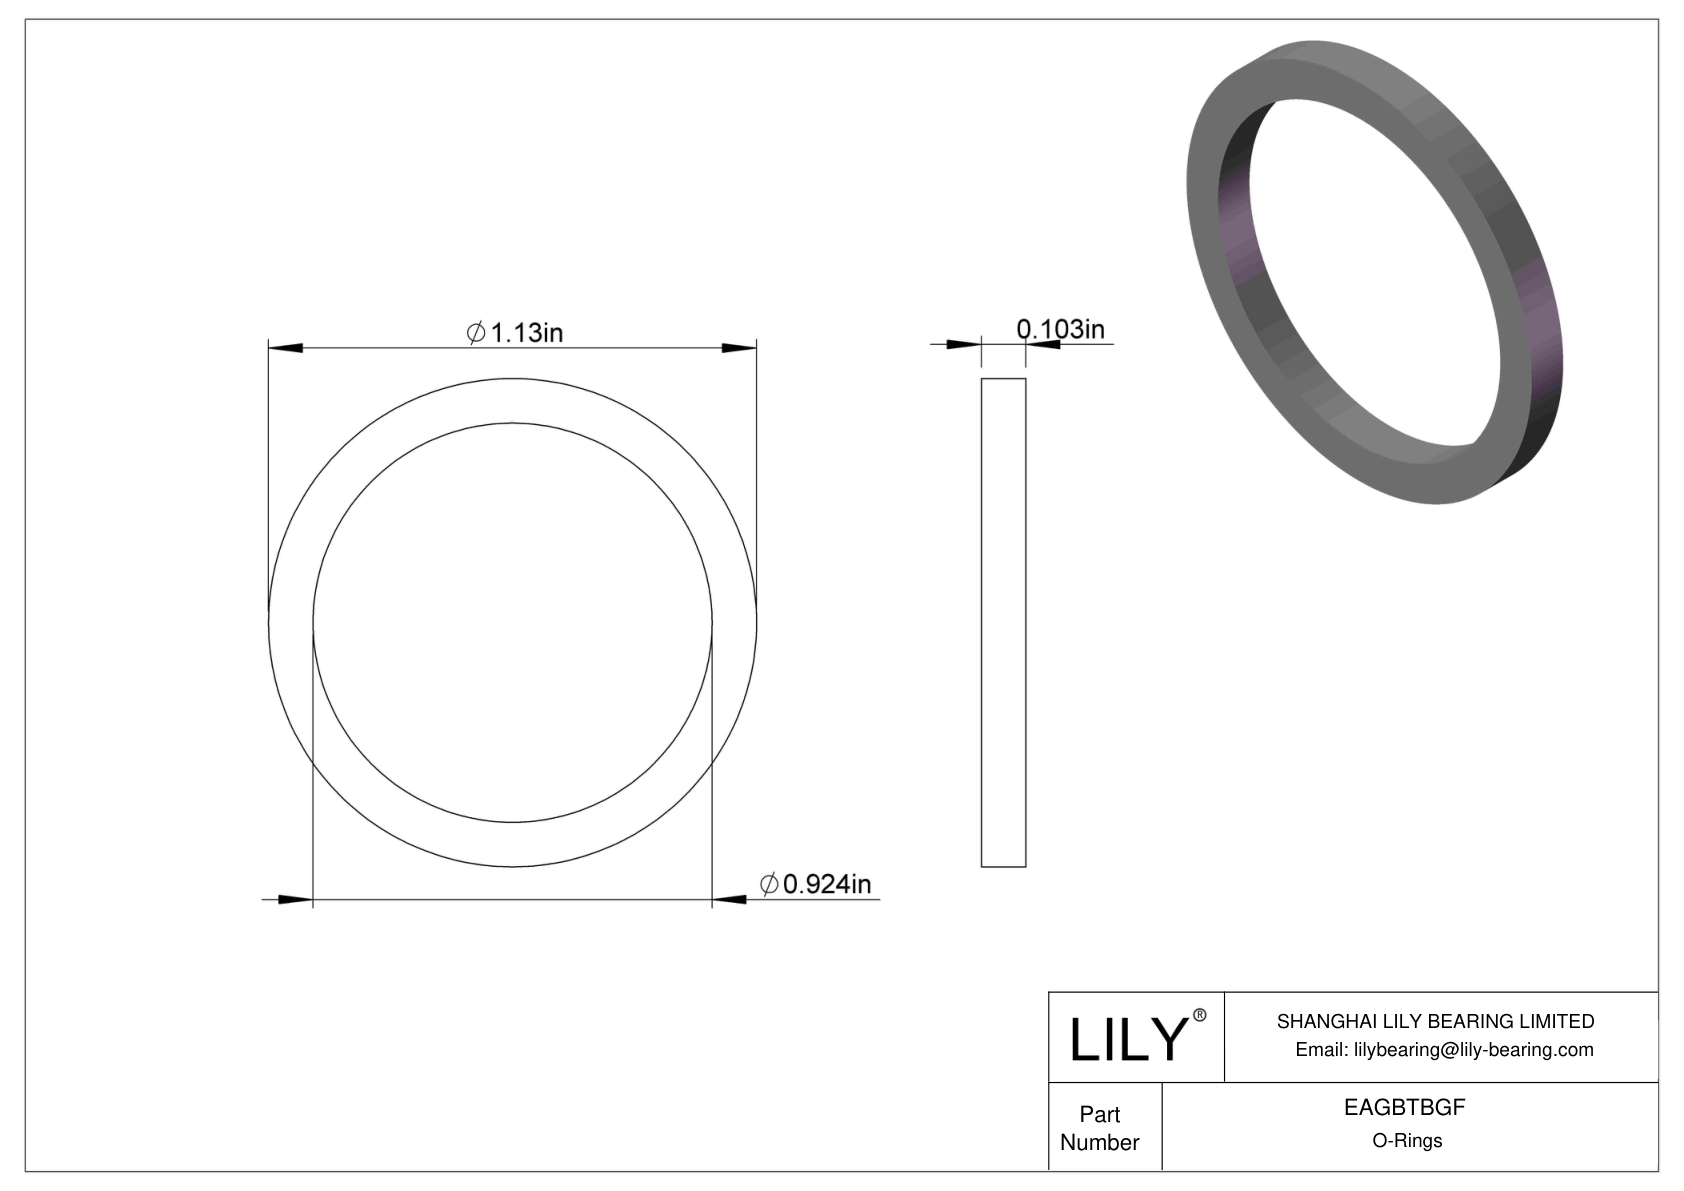 EAGBTBGF Oil Resistant O-Rings Square cad drawing